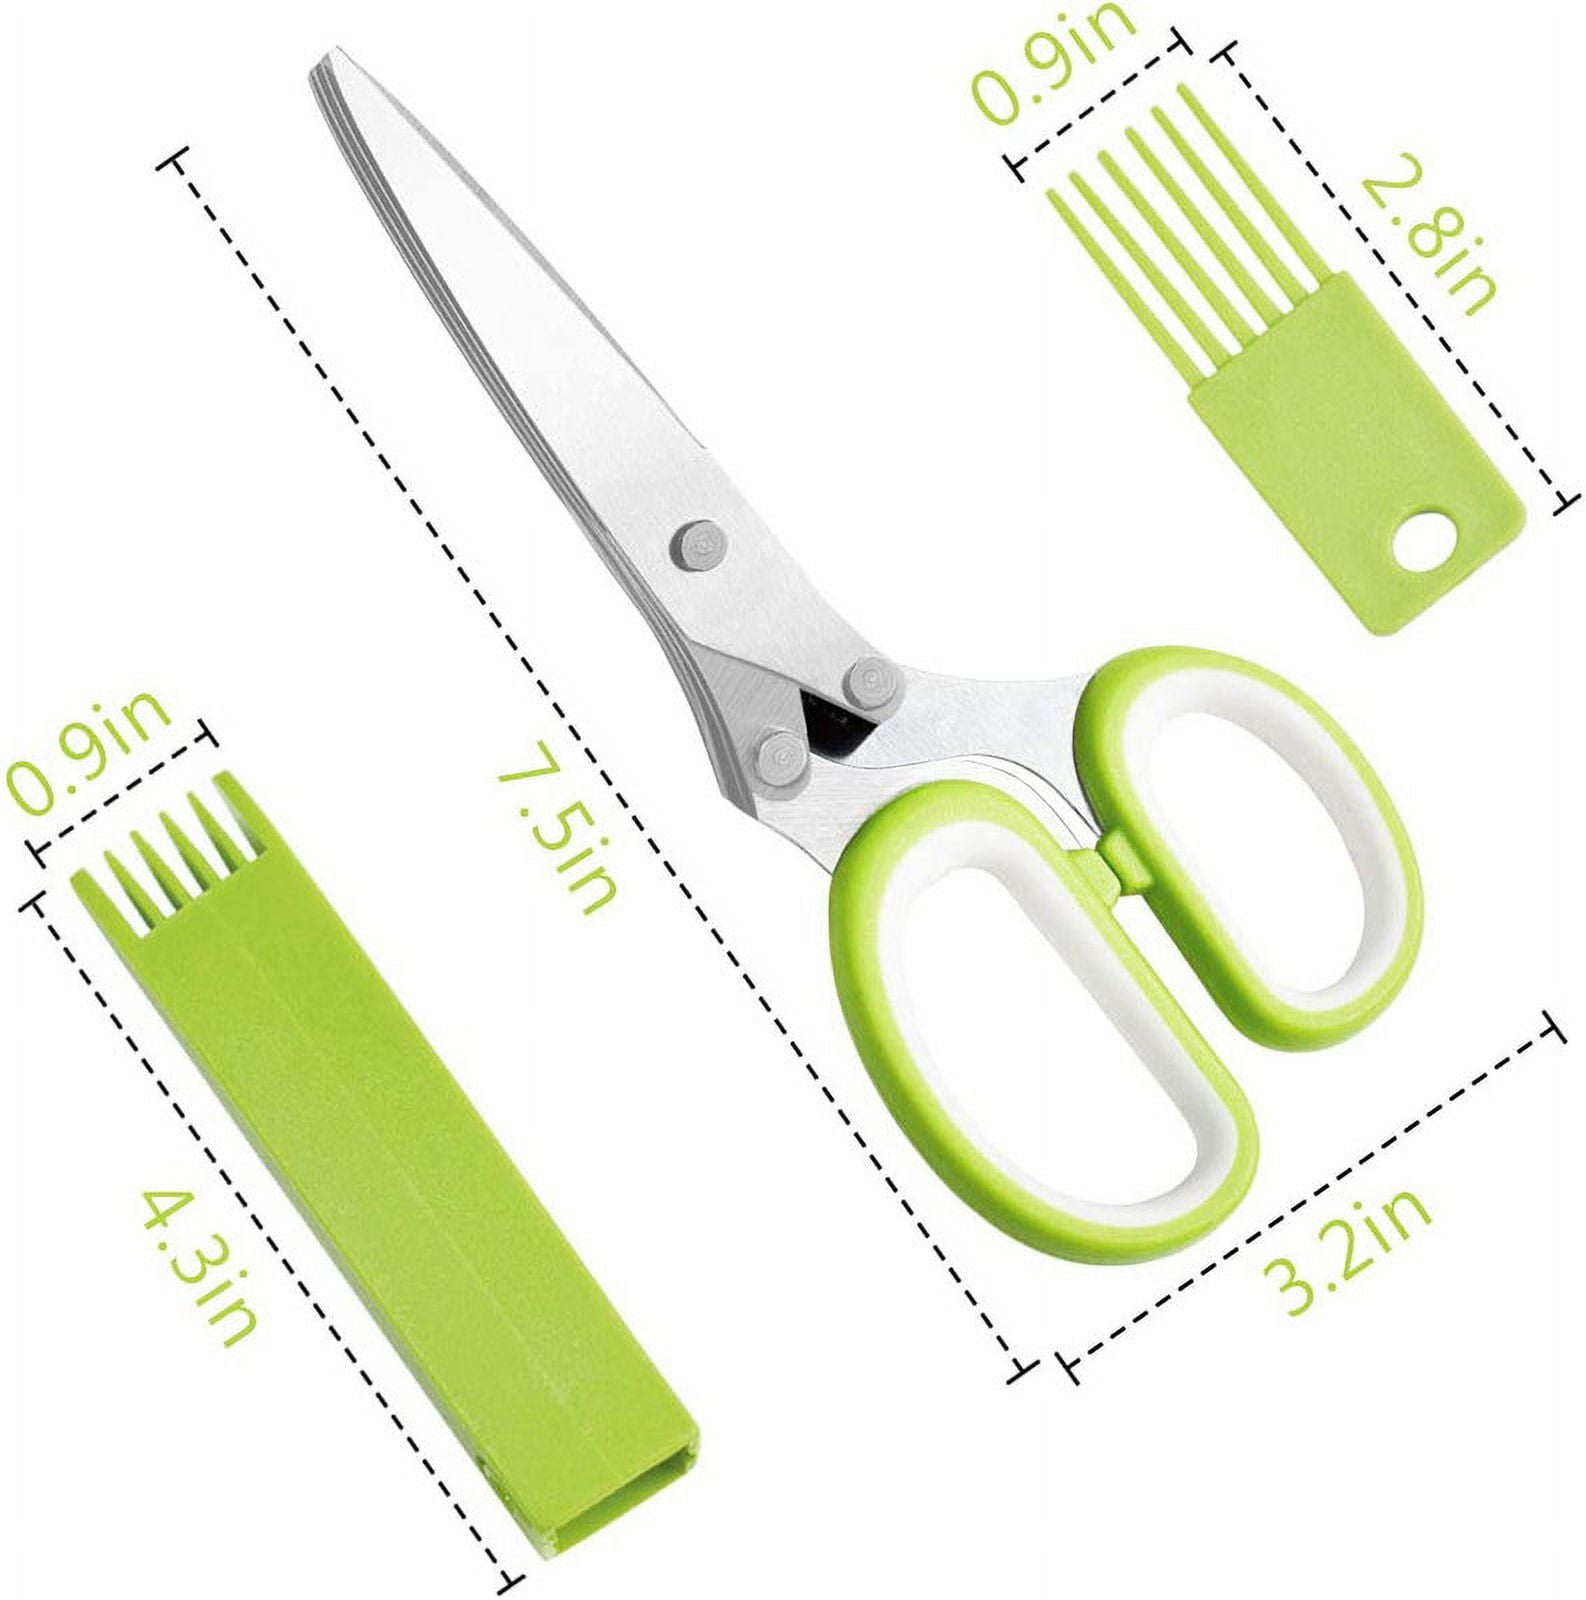 Herb Scissors Set, Multipurpose 5 Blade Kitchen Shears with Safety Cover  and Cleaning Comb, Sharp and Anti-rust Herb Scissors Set for Cutting  Cilantro Onion Salad Garden Herbs 